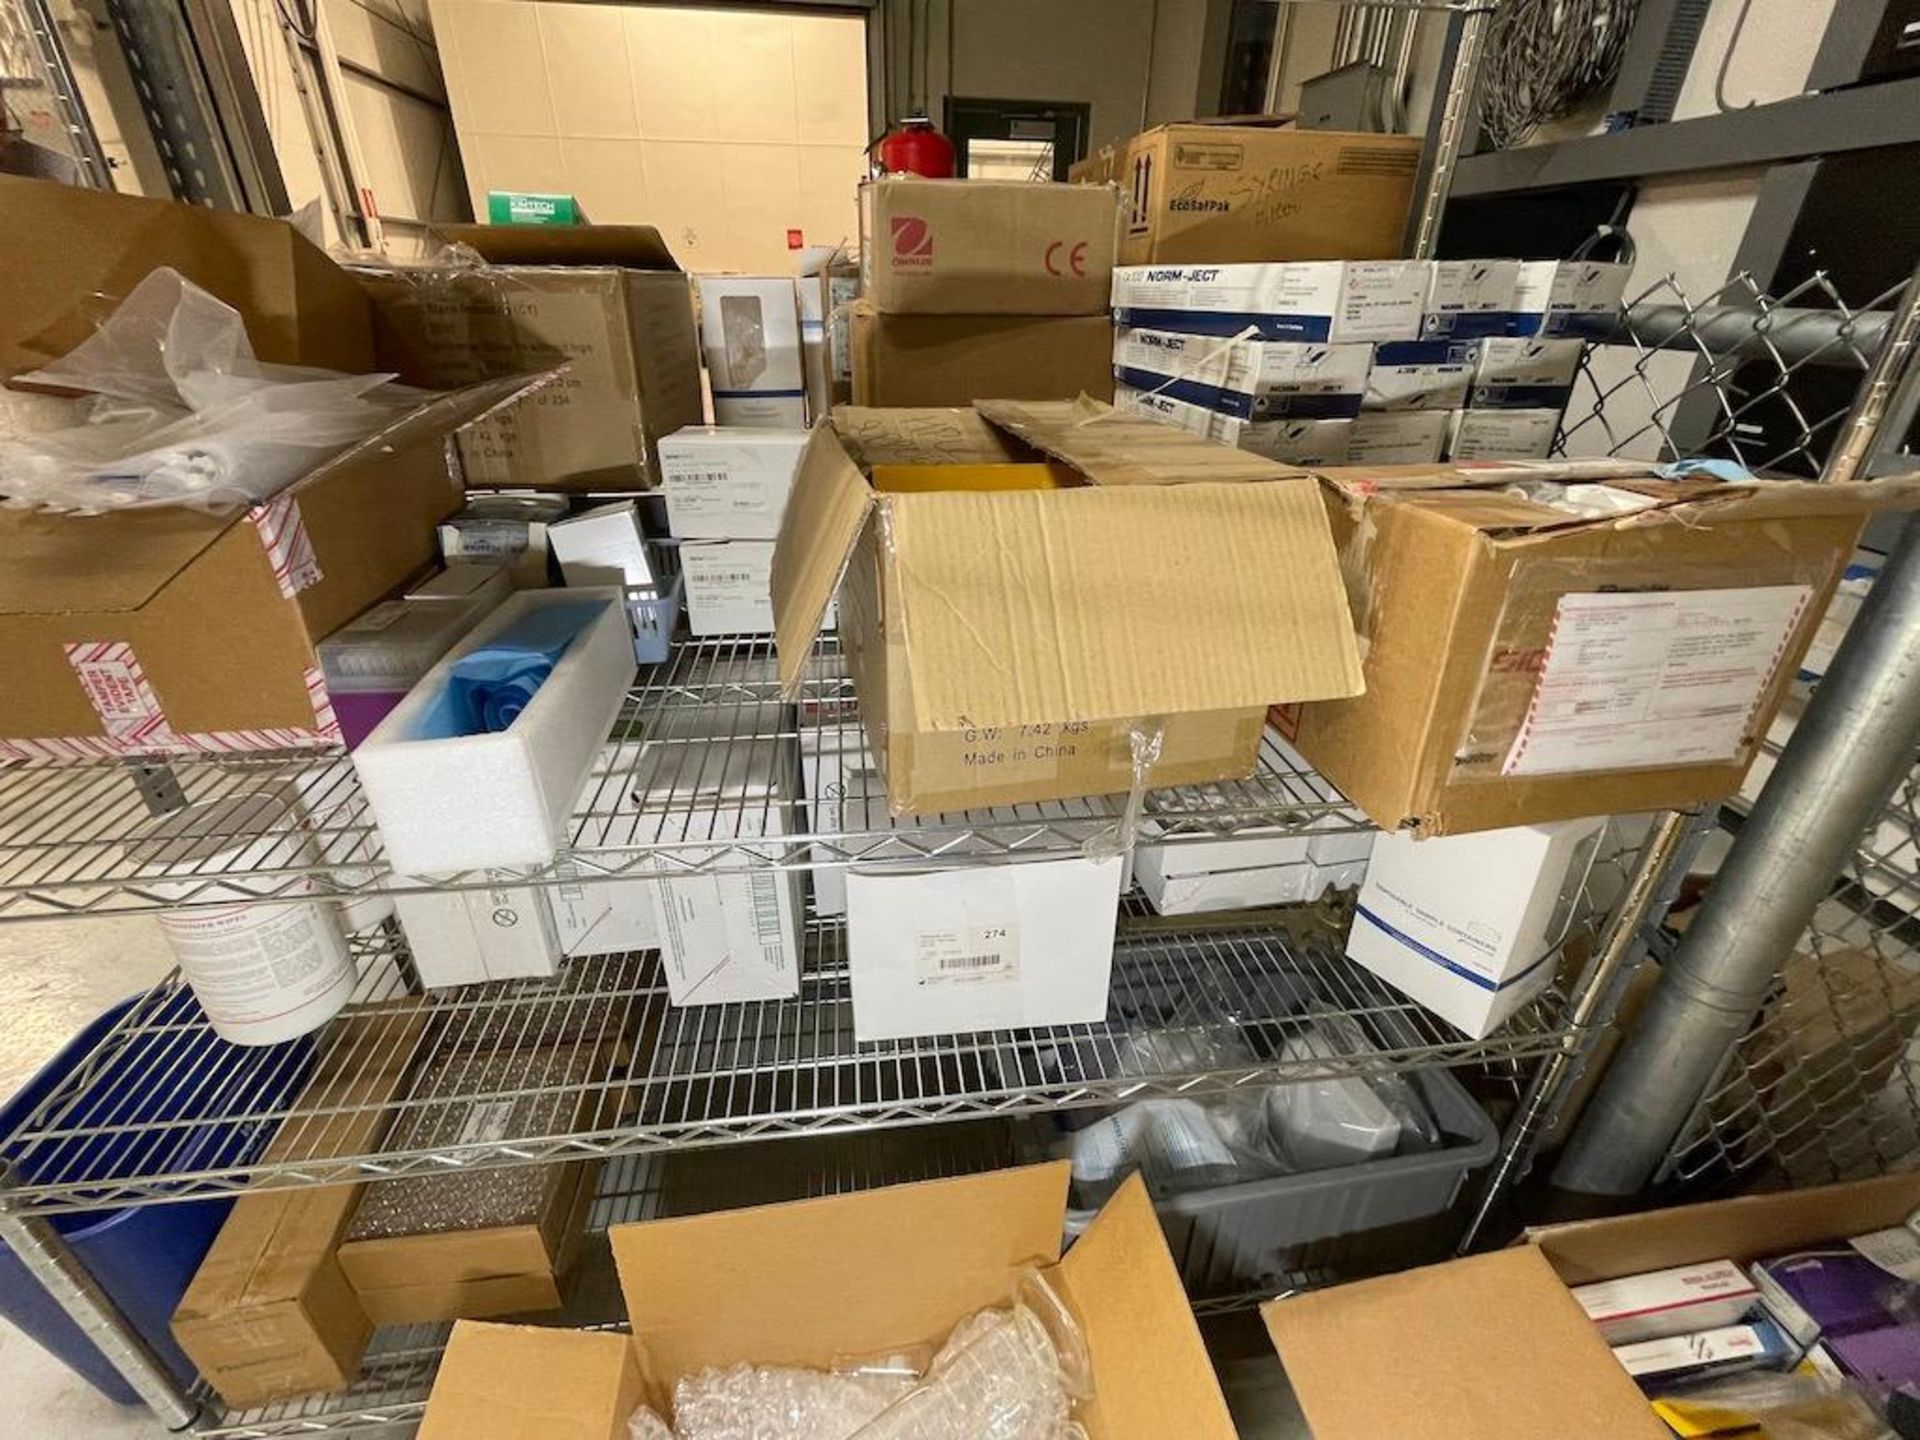 LOT 4 SHELF WIRE FRAME RACK W LARGE BOX OF AGILENT LAB GC PRODUCTS, AUTOSAMPLER SYRINGES, KINETEX LC - Image 9 of 22